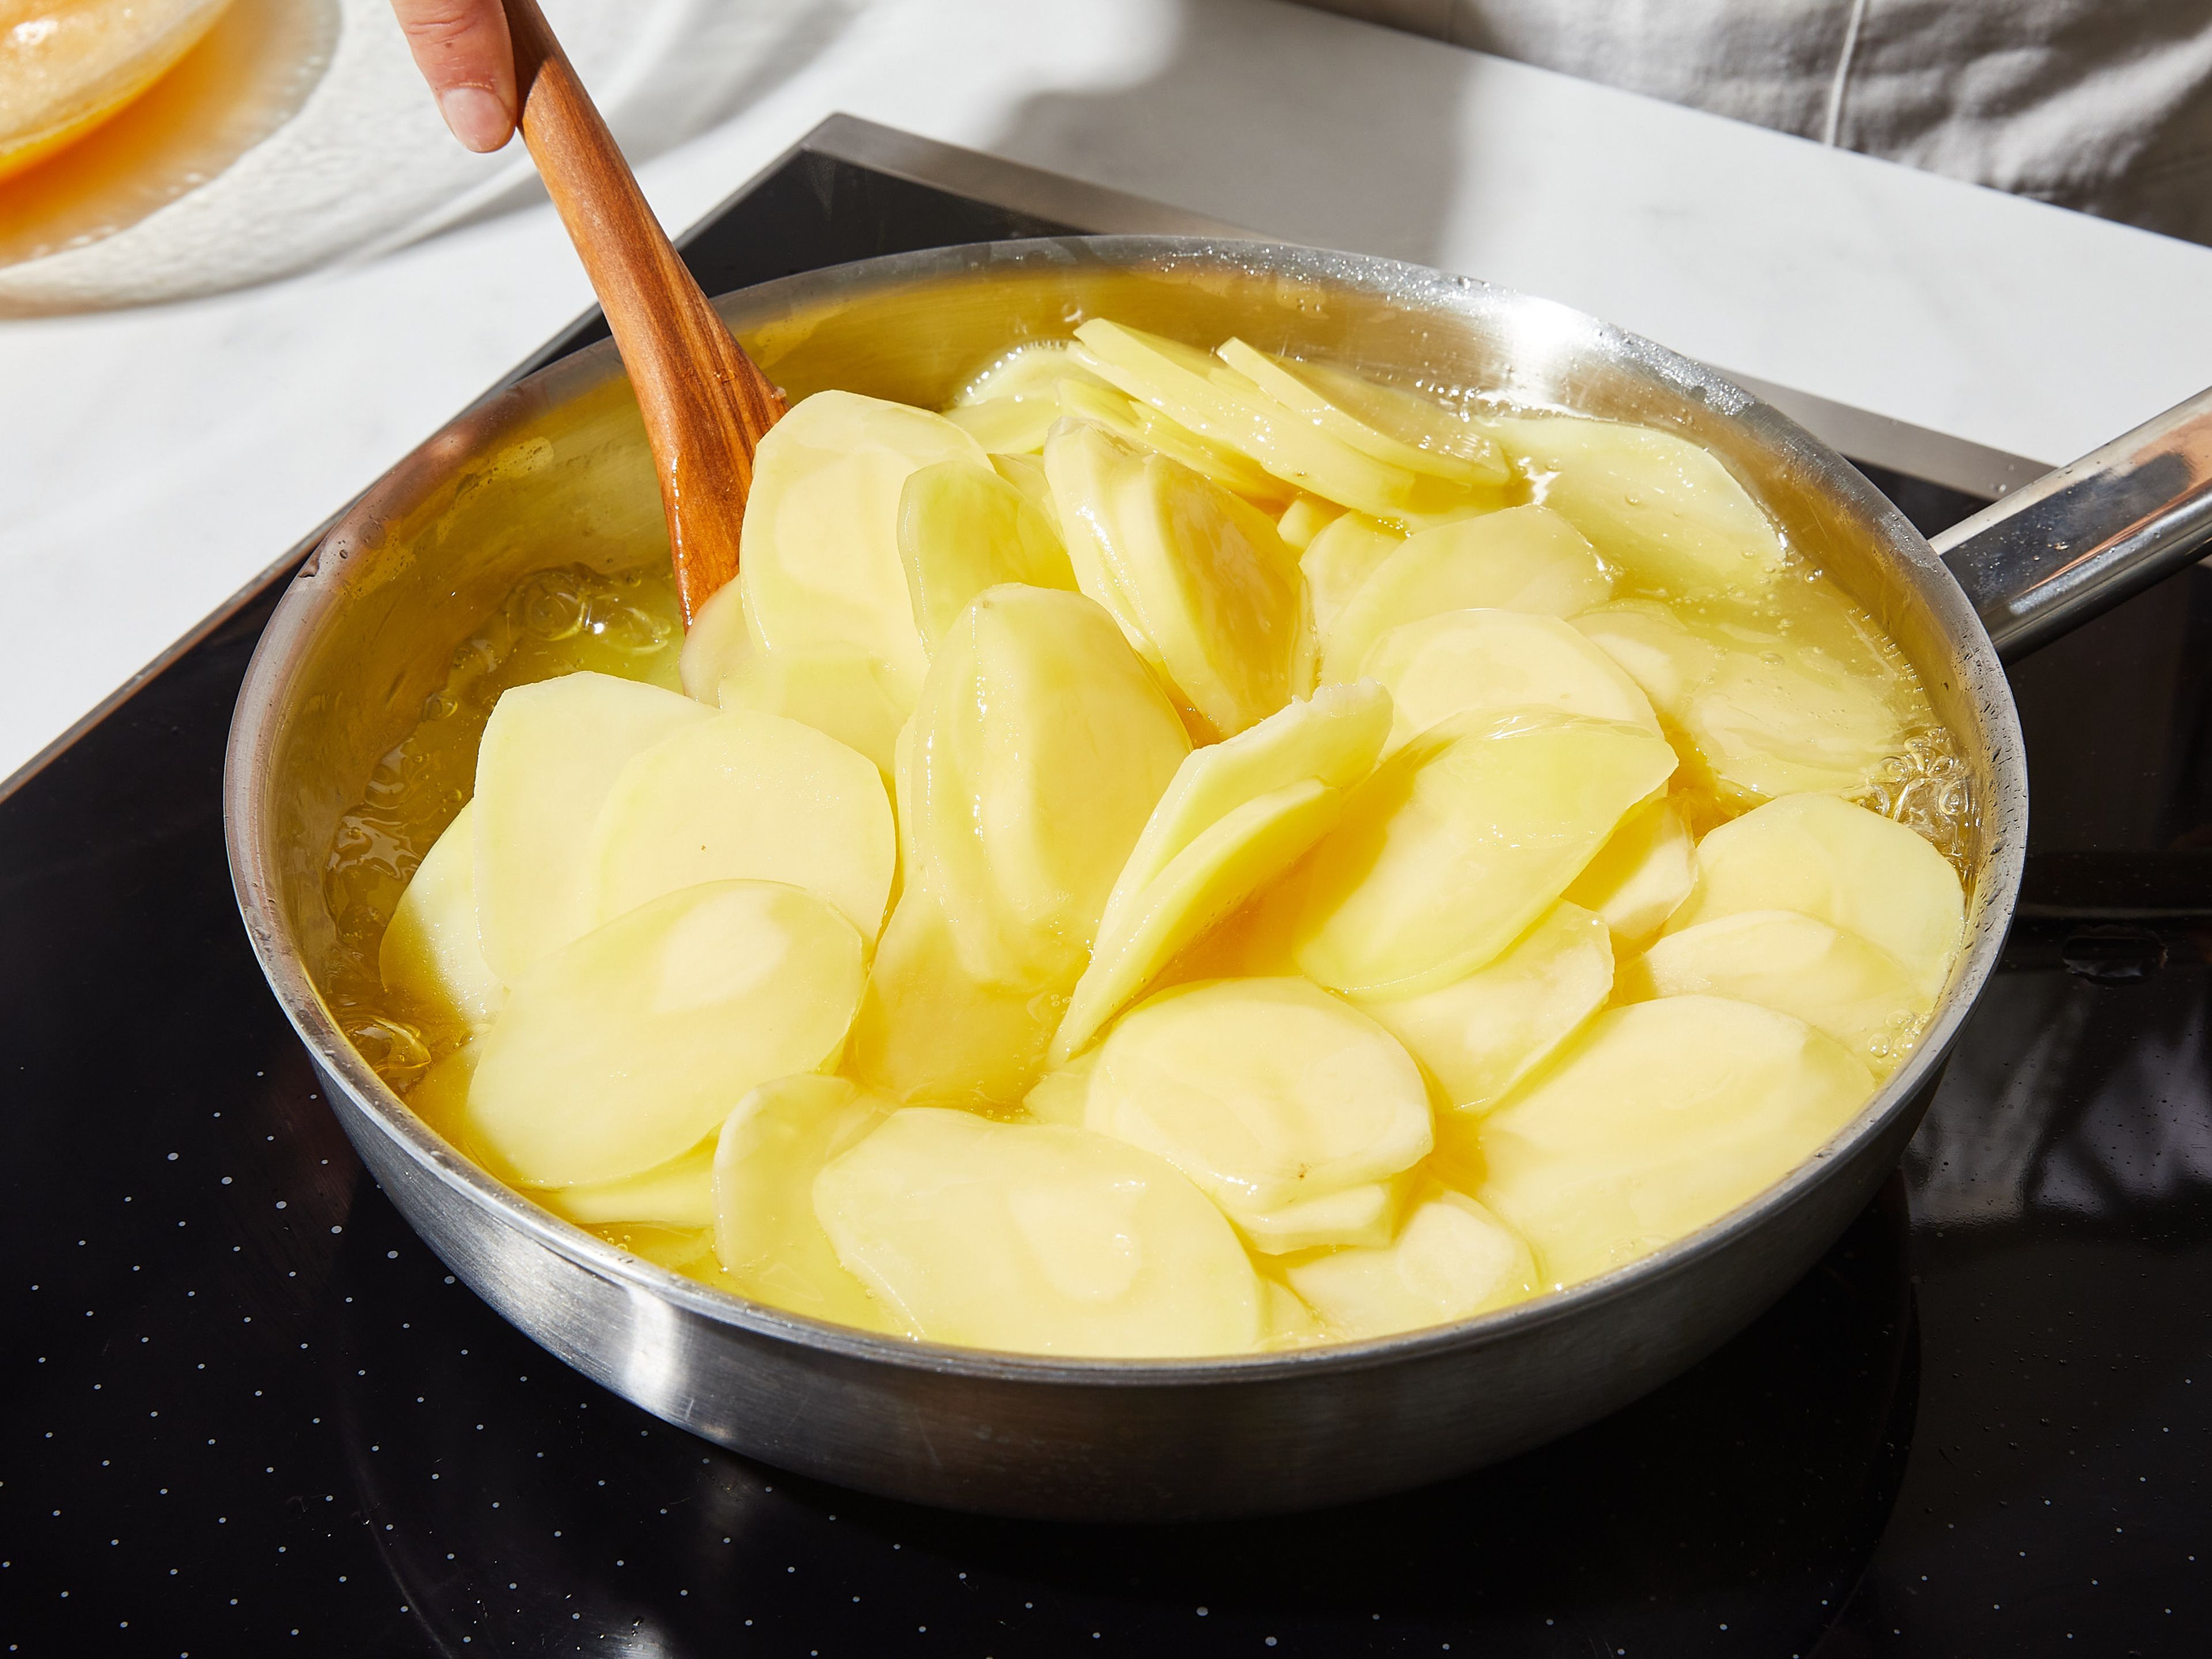 Peel the potatoes and cut into thin slices using a mandoline. Heat the oil in a pan and cook the potato slices for 15 – 20 min. on low heat. If necessary, add a little more oil so they almost float. The potatoes should not take on any color.